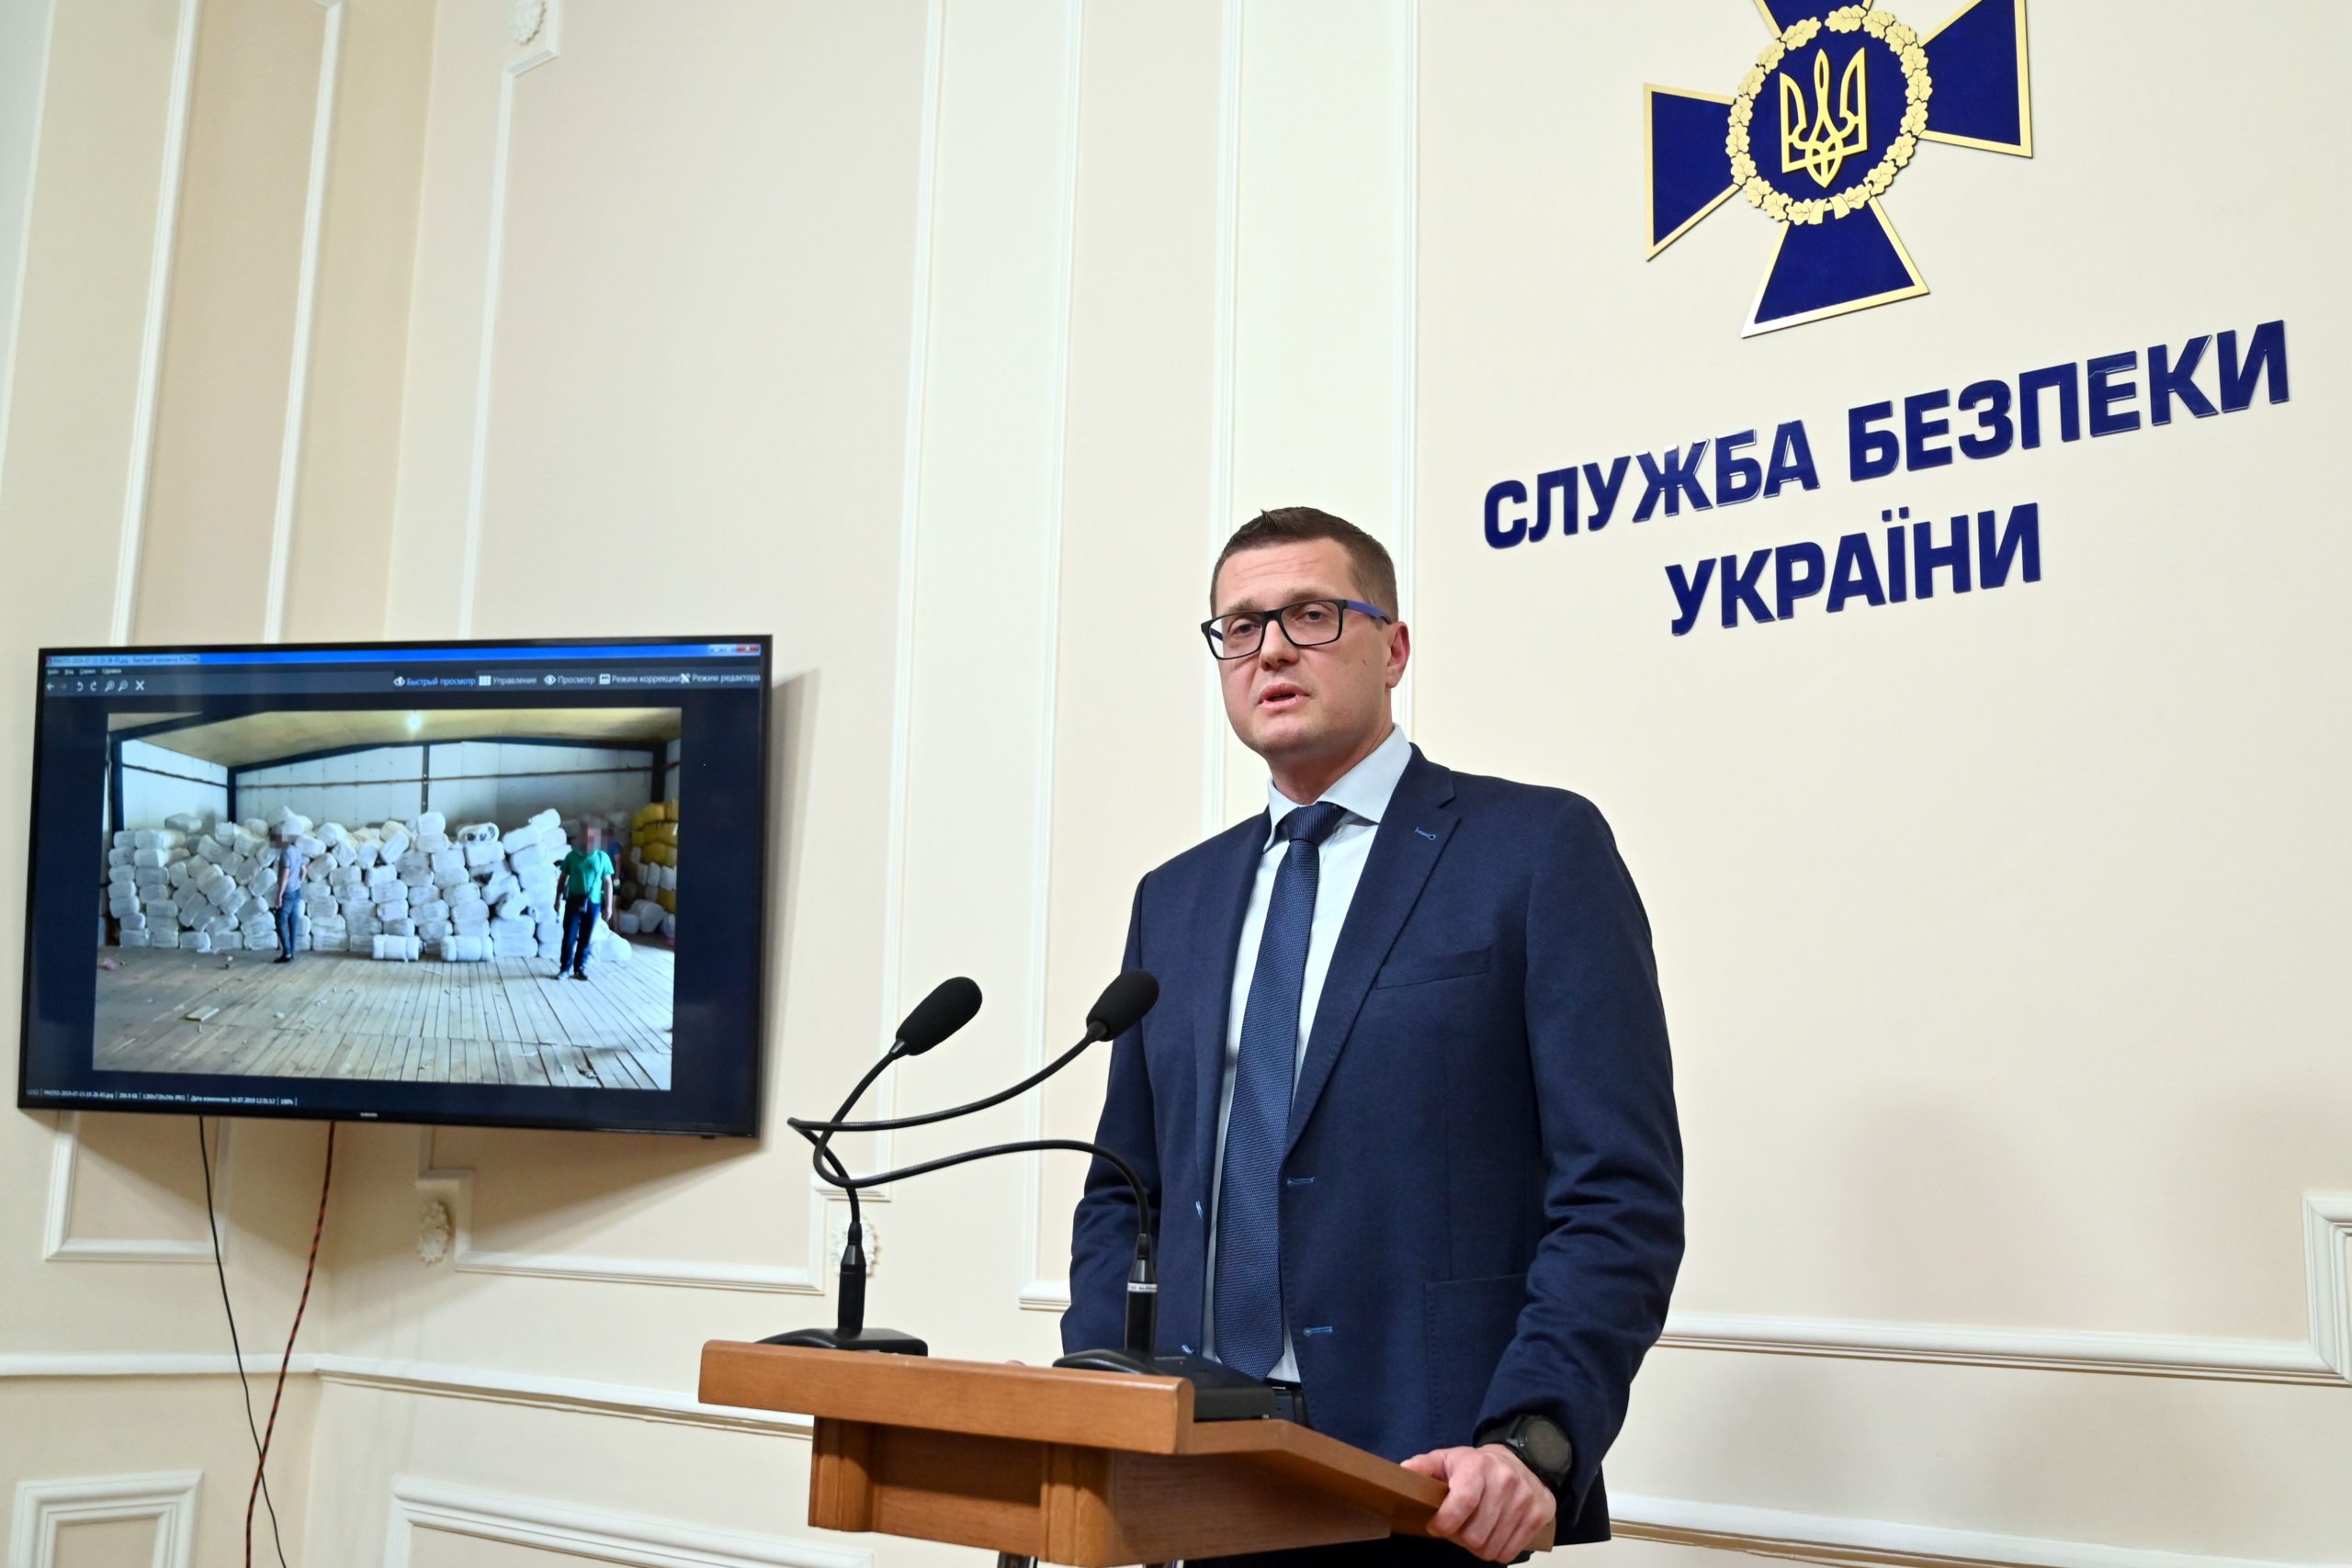 Ukraine's SBU security service acting deputy chief Ivan Bakanov speaks as he holds a press conference in Kiev on July 16, 2019. - Ukraine said on July 16 it has taken down a cybercrime network which caused millions of dollars in damage in the United States, the EU and Japan. Bakanov told reporters that the group, which was headed by Ukrainian national Mykhailo Rytikov, provided service of bulletproof hosting to hundreds of hackers around the globe. (SERGEI SUPINSKY/AFP via Getty Images)